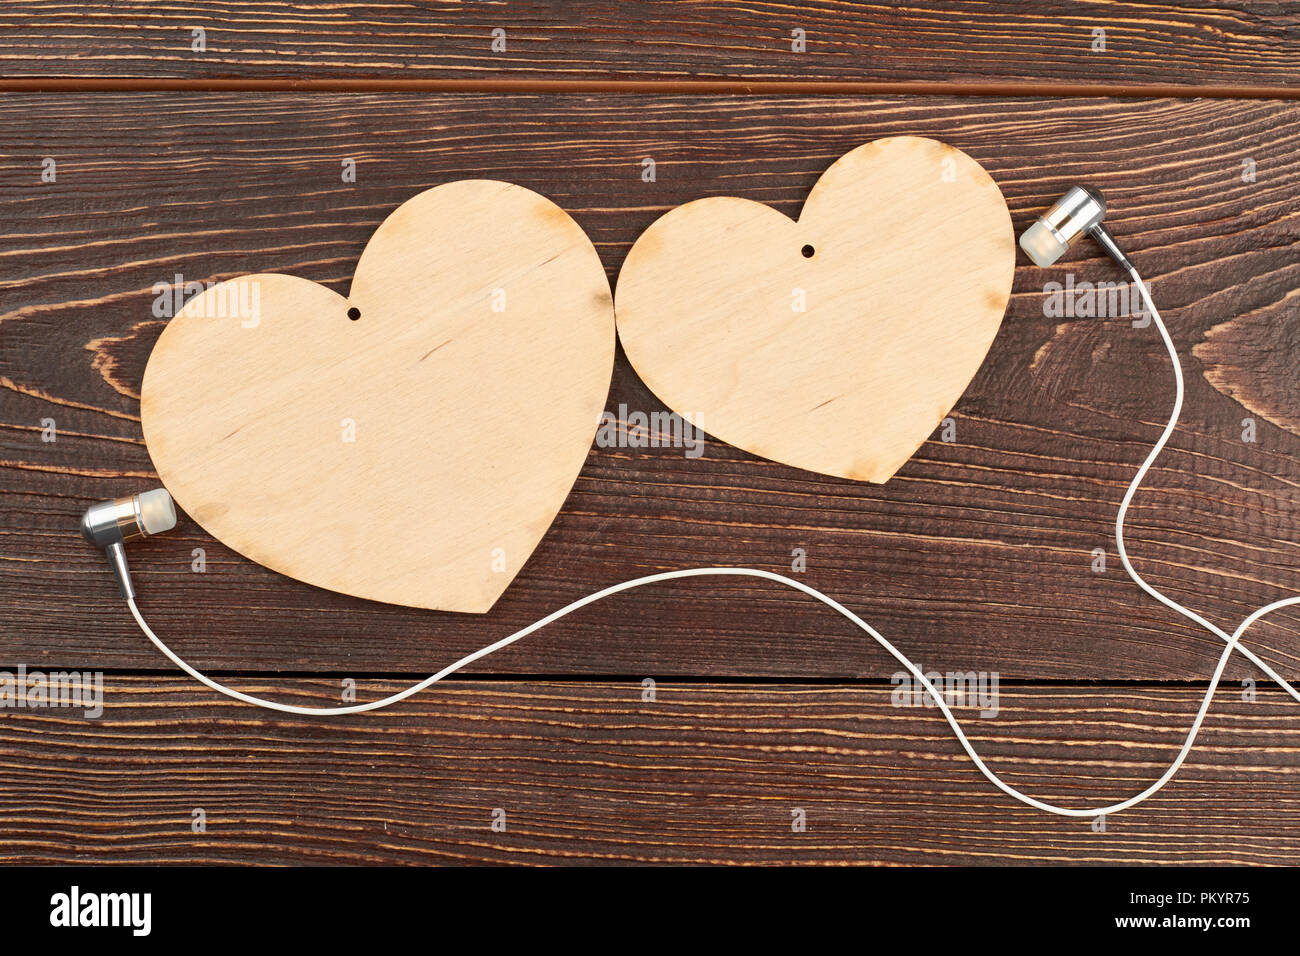 Carved hearts and earphones on wooden background. Blank hearts for decoupage and headphones. Music is love. Romantic music concept. Stock Photo